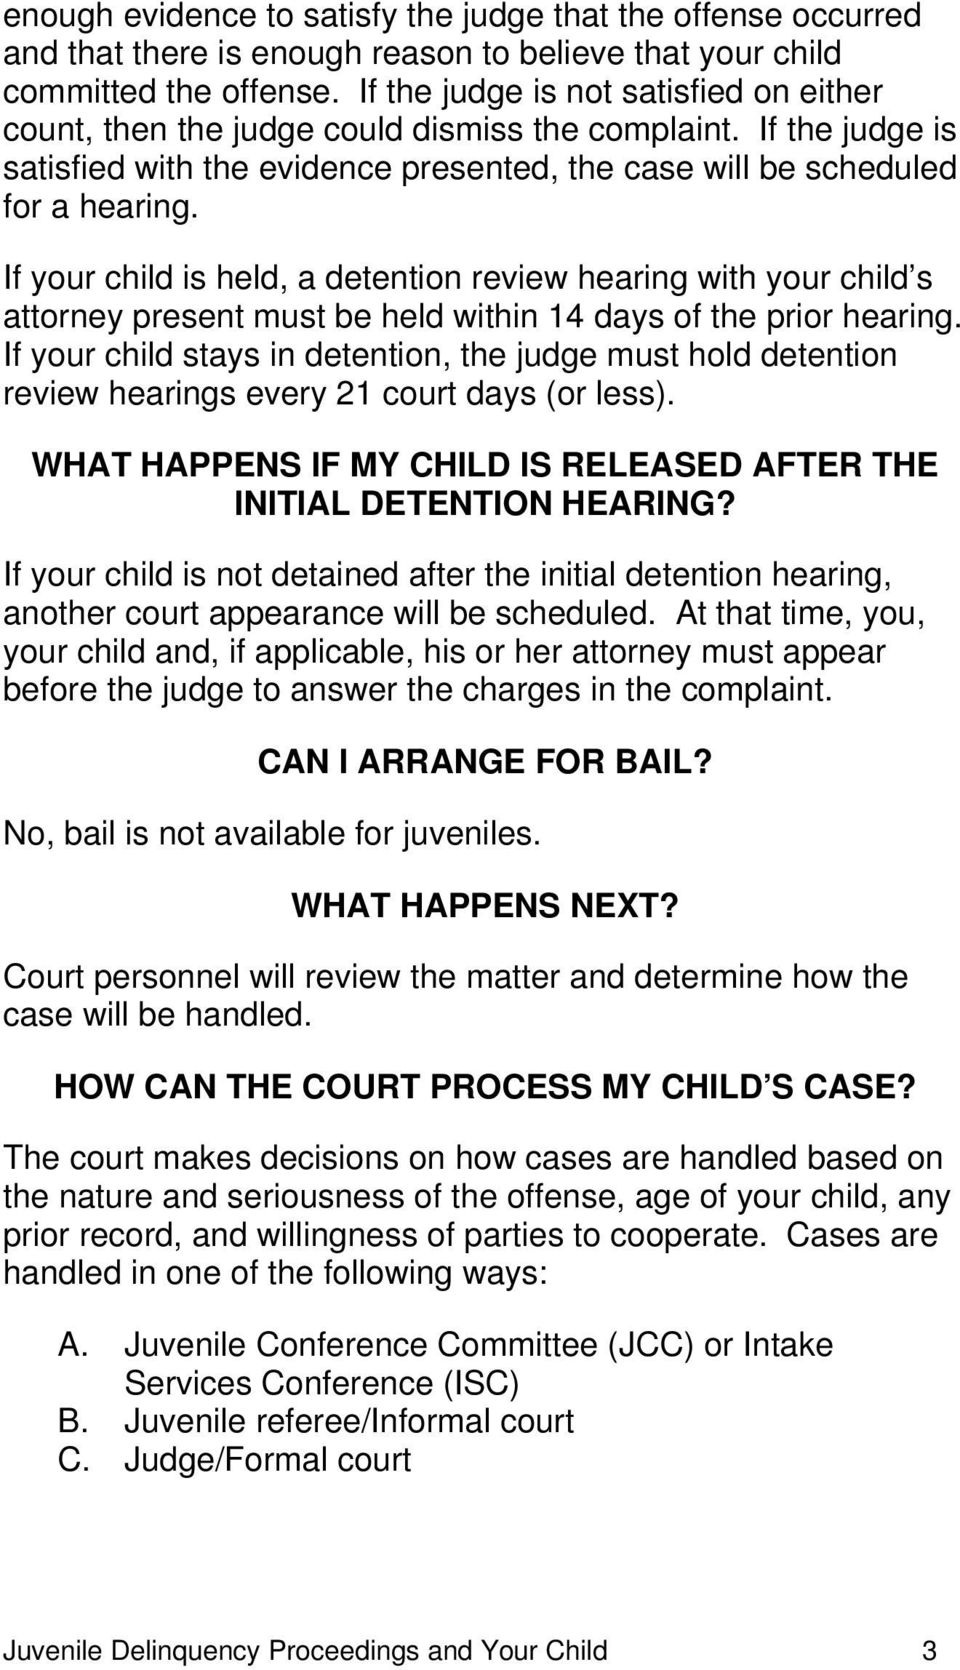 If your child is held, a detention review hearing with your child s attorney present must be held within 14 days of the prior hearing.